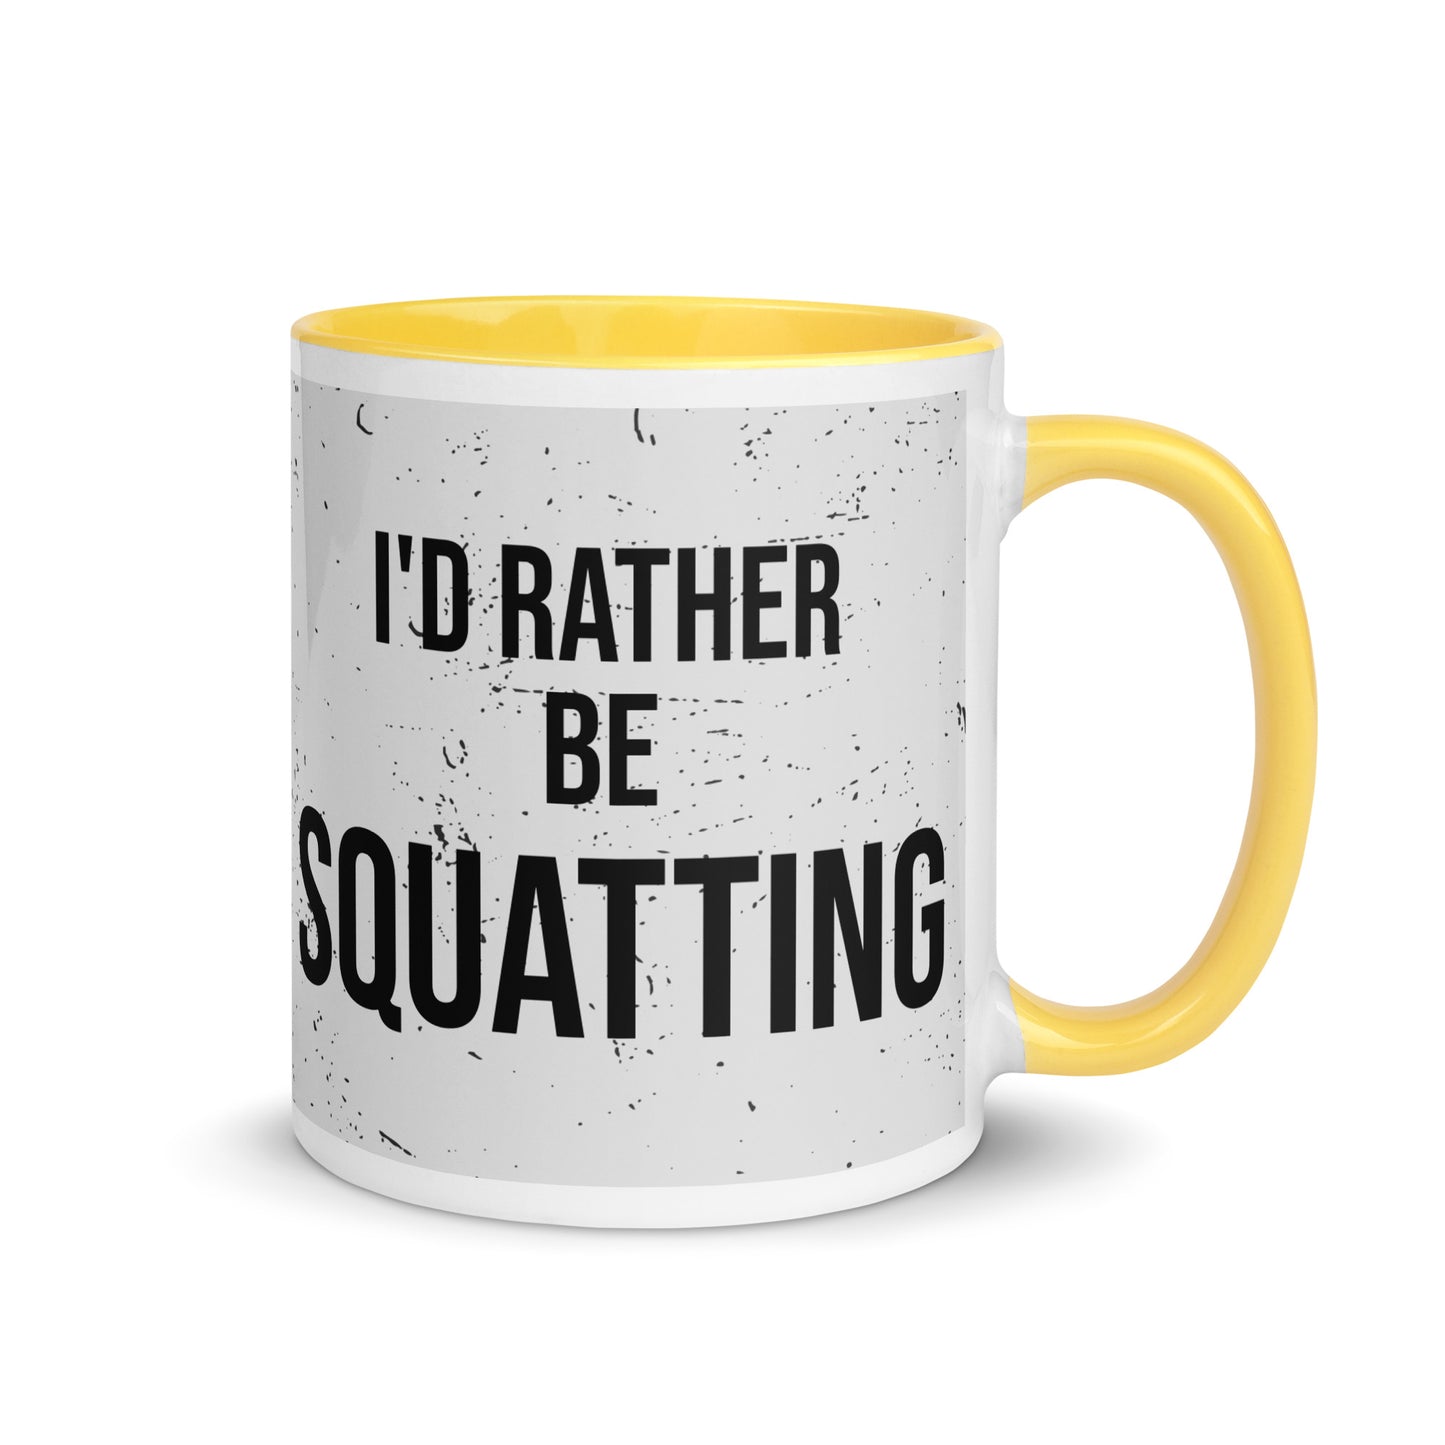 Yellow handled mug with I'd rather be squatting written on it, across a grey splatter background. A gift for someone who loves the gym.